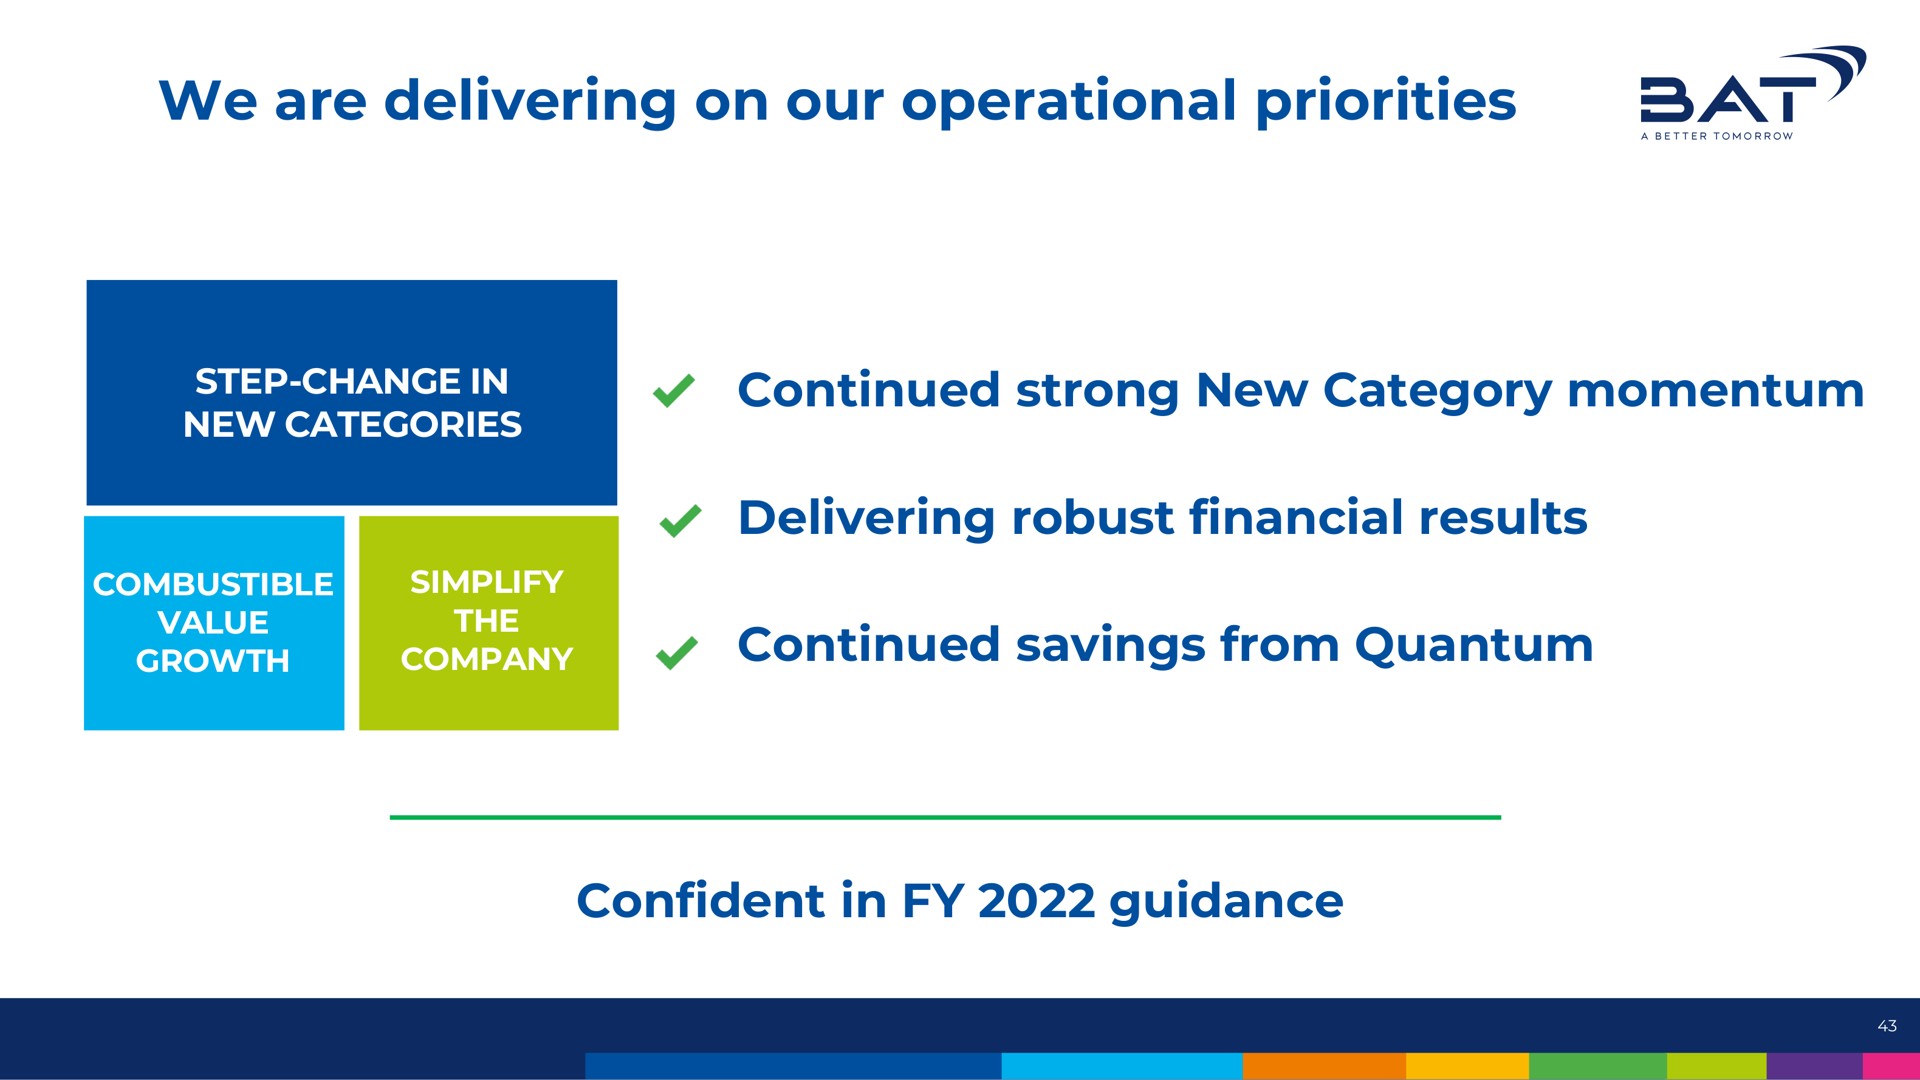 we are delivering on our operational priorities at robust financial results | BAT